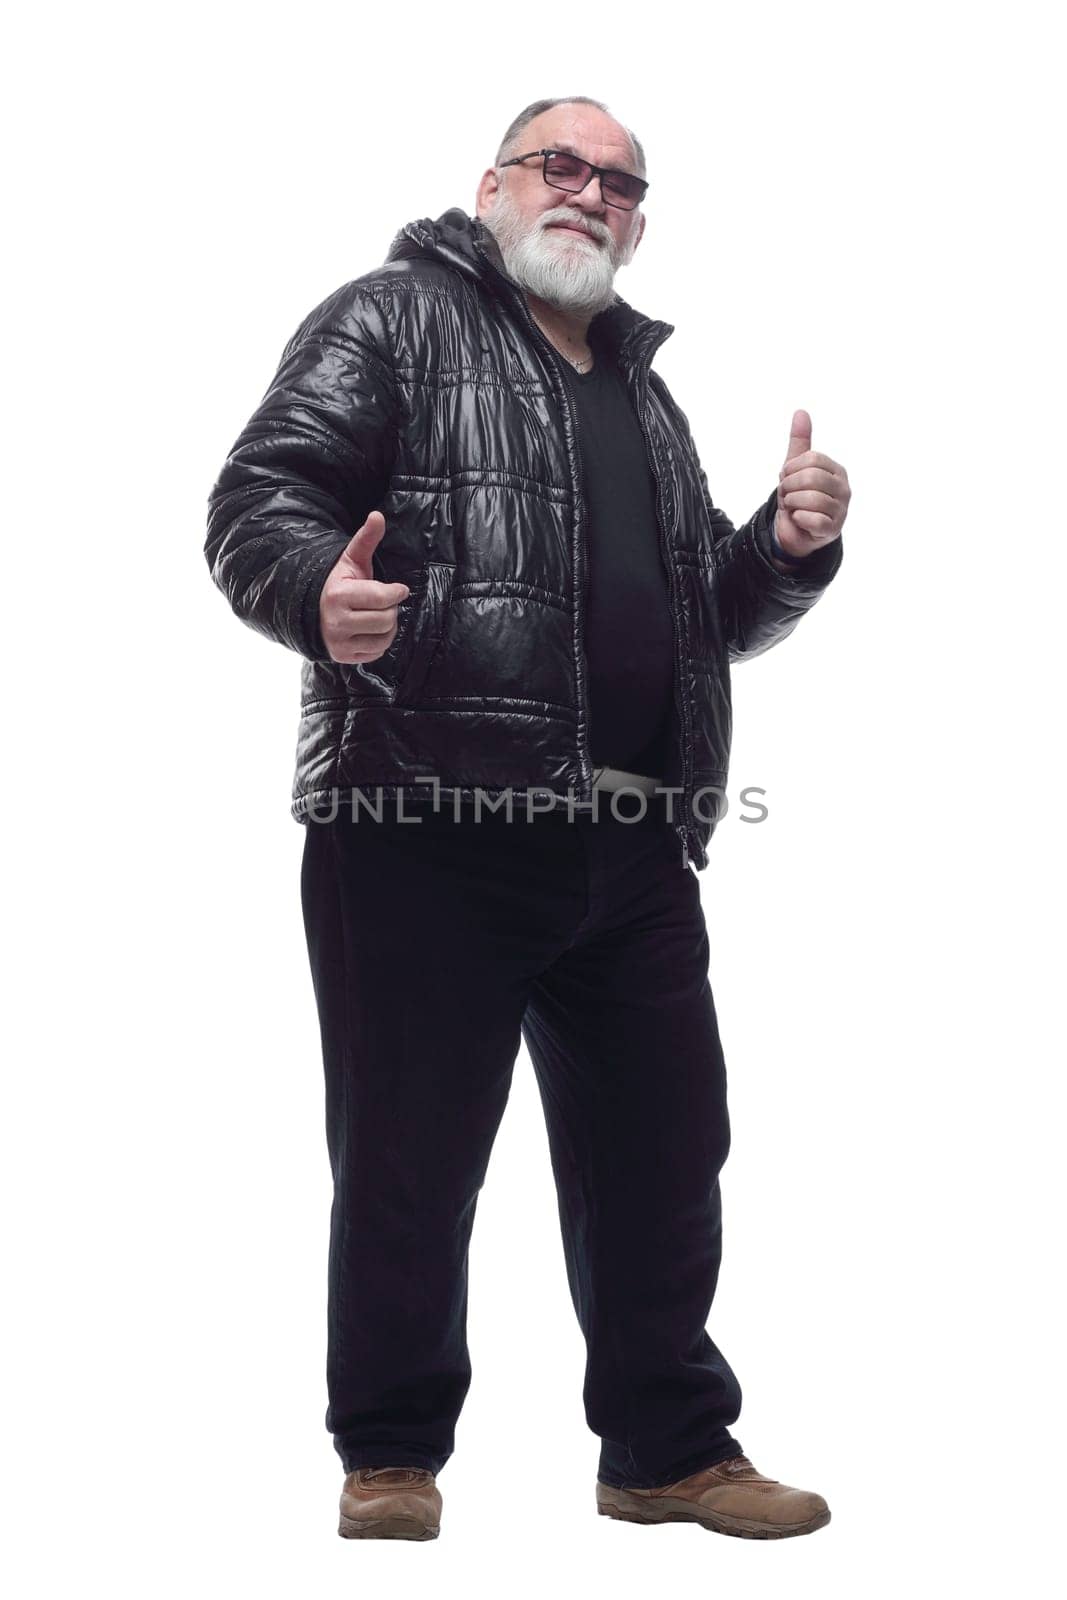 in full growth. contented bearded man in a winter jacket giving a thumbs up. isolated on a white background.